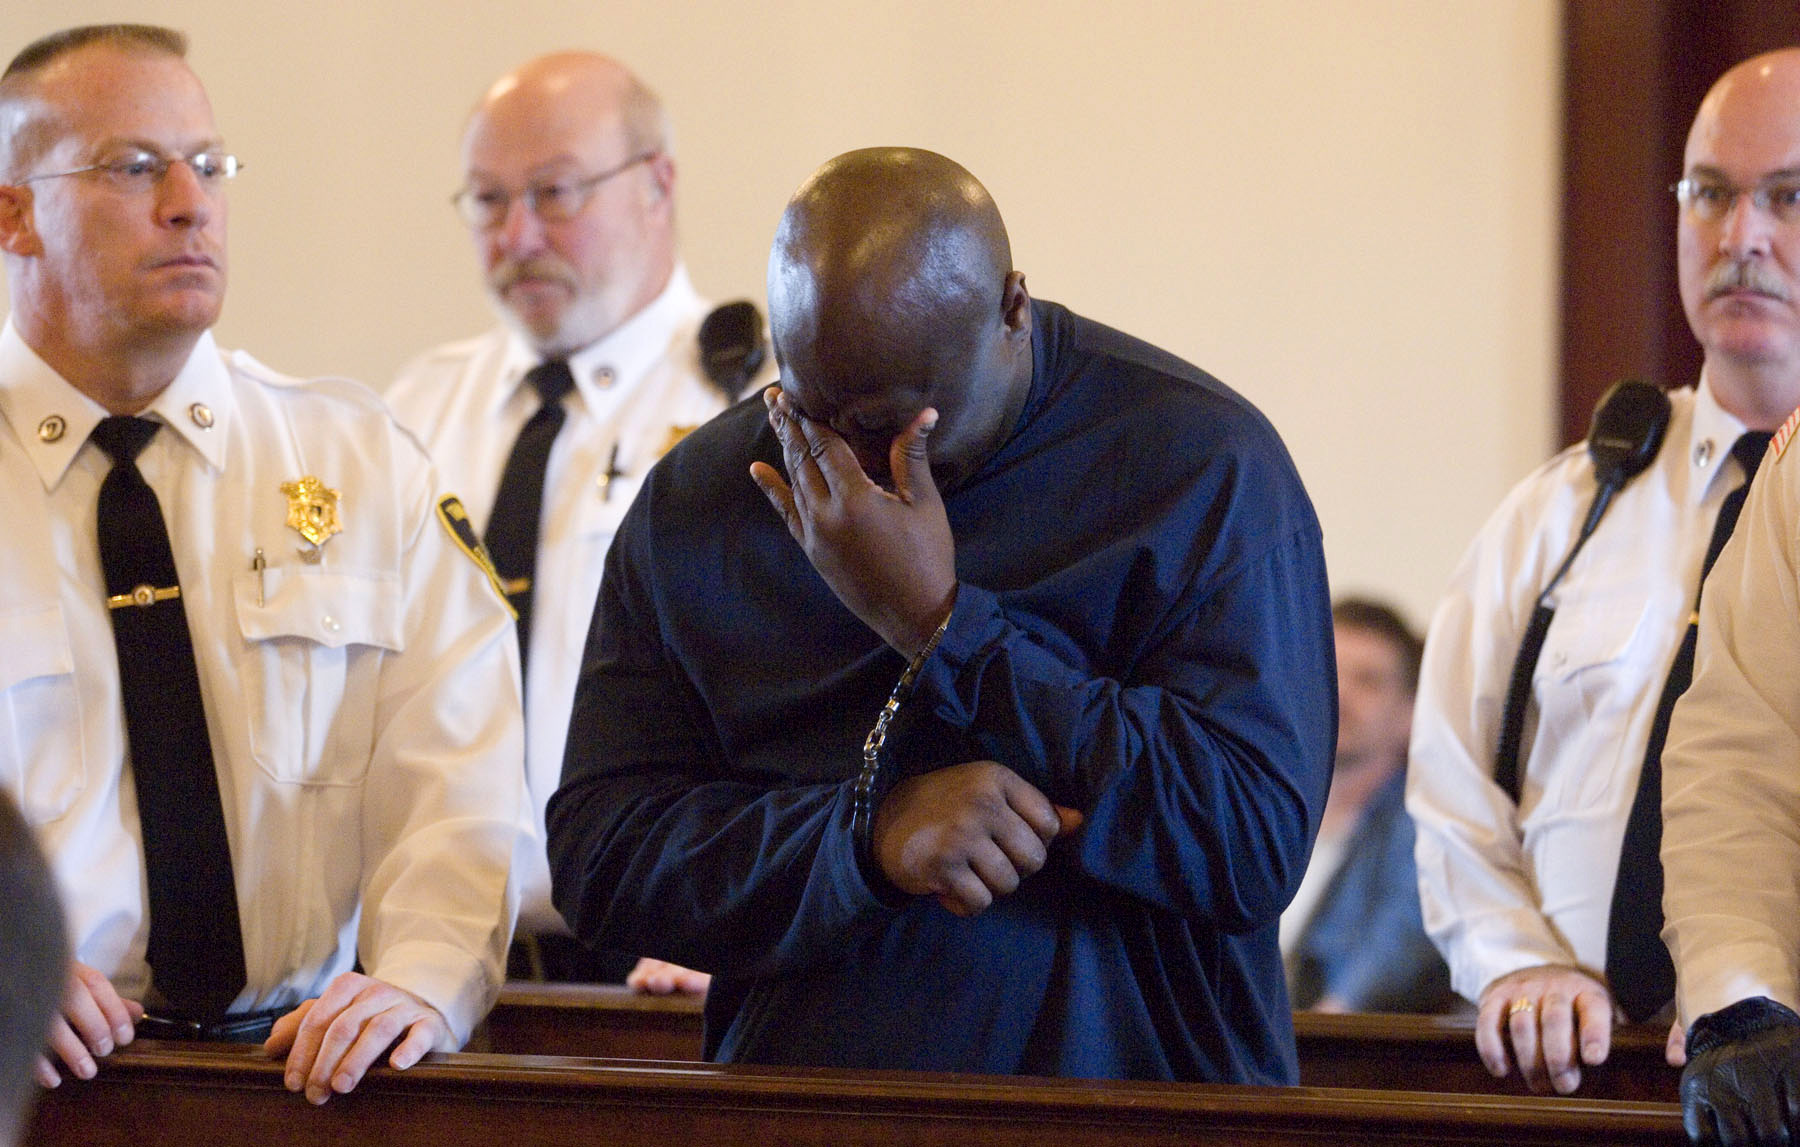 PHOTO: Christopher McCowen wipes away tears as he is sentenced after being convicted  of rape and murder in the slaying of a fashion writer Christa Worthington, Nov. 16, 2006, in Barnstable, Mass.